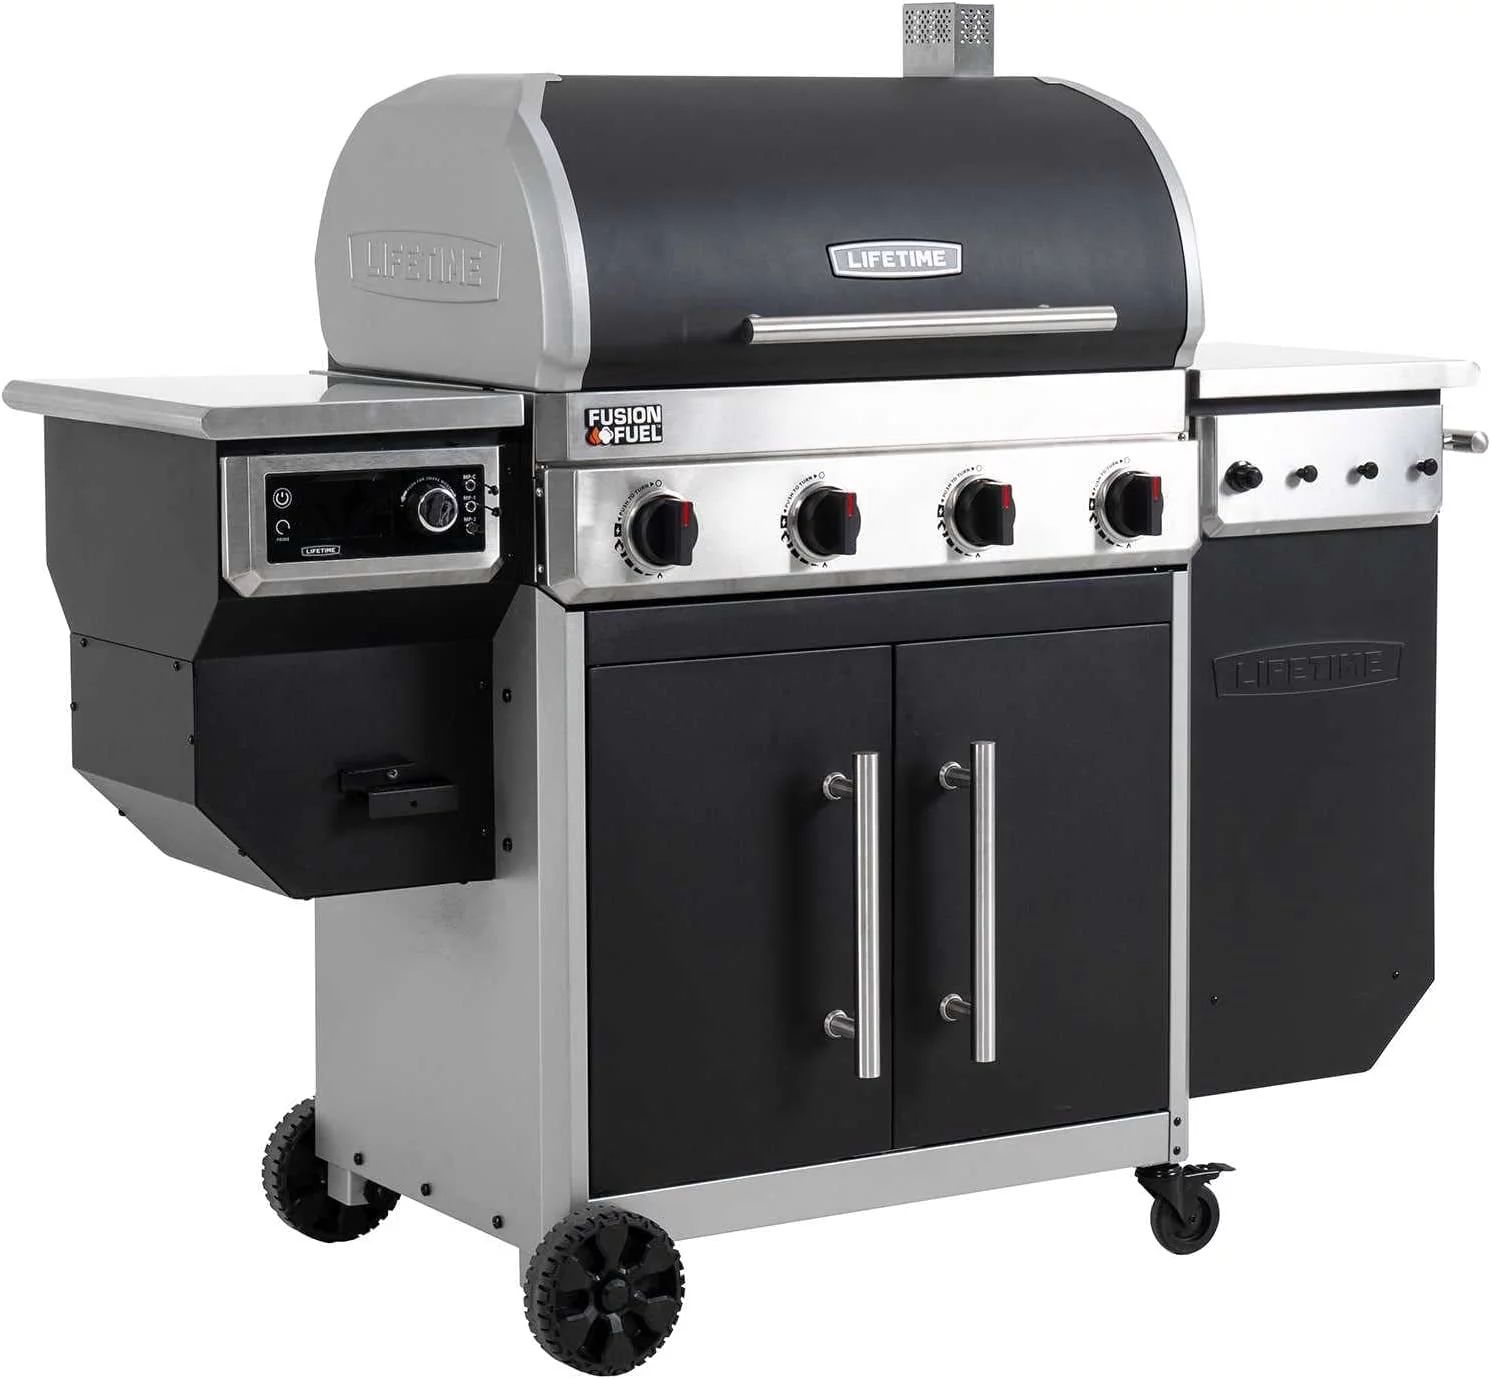 Lifetime Gas Grill and Wood Pellet Smoker Combo, WiFi and Bluetooth Control Technology | Walmart (US)